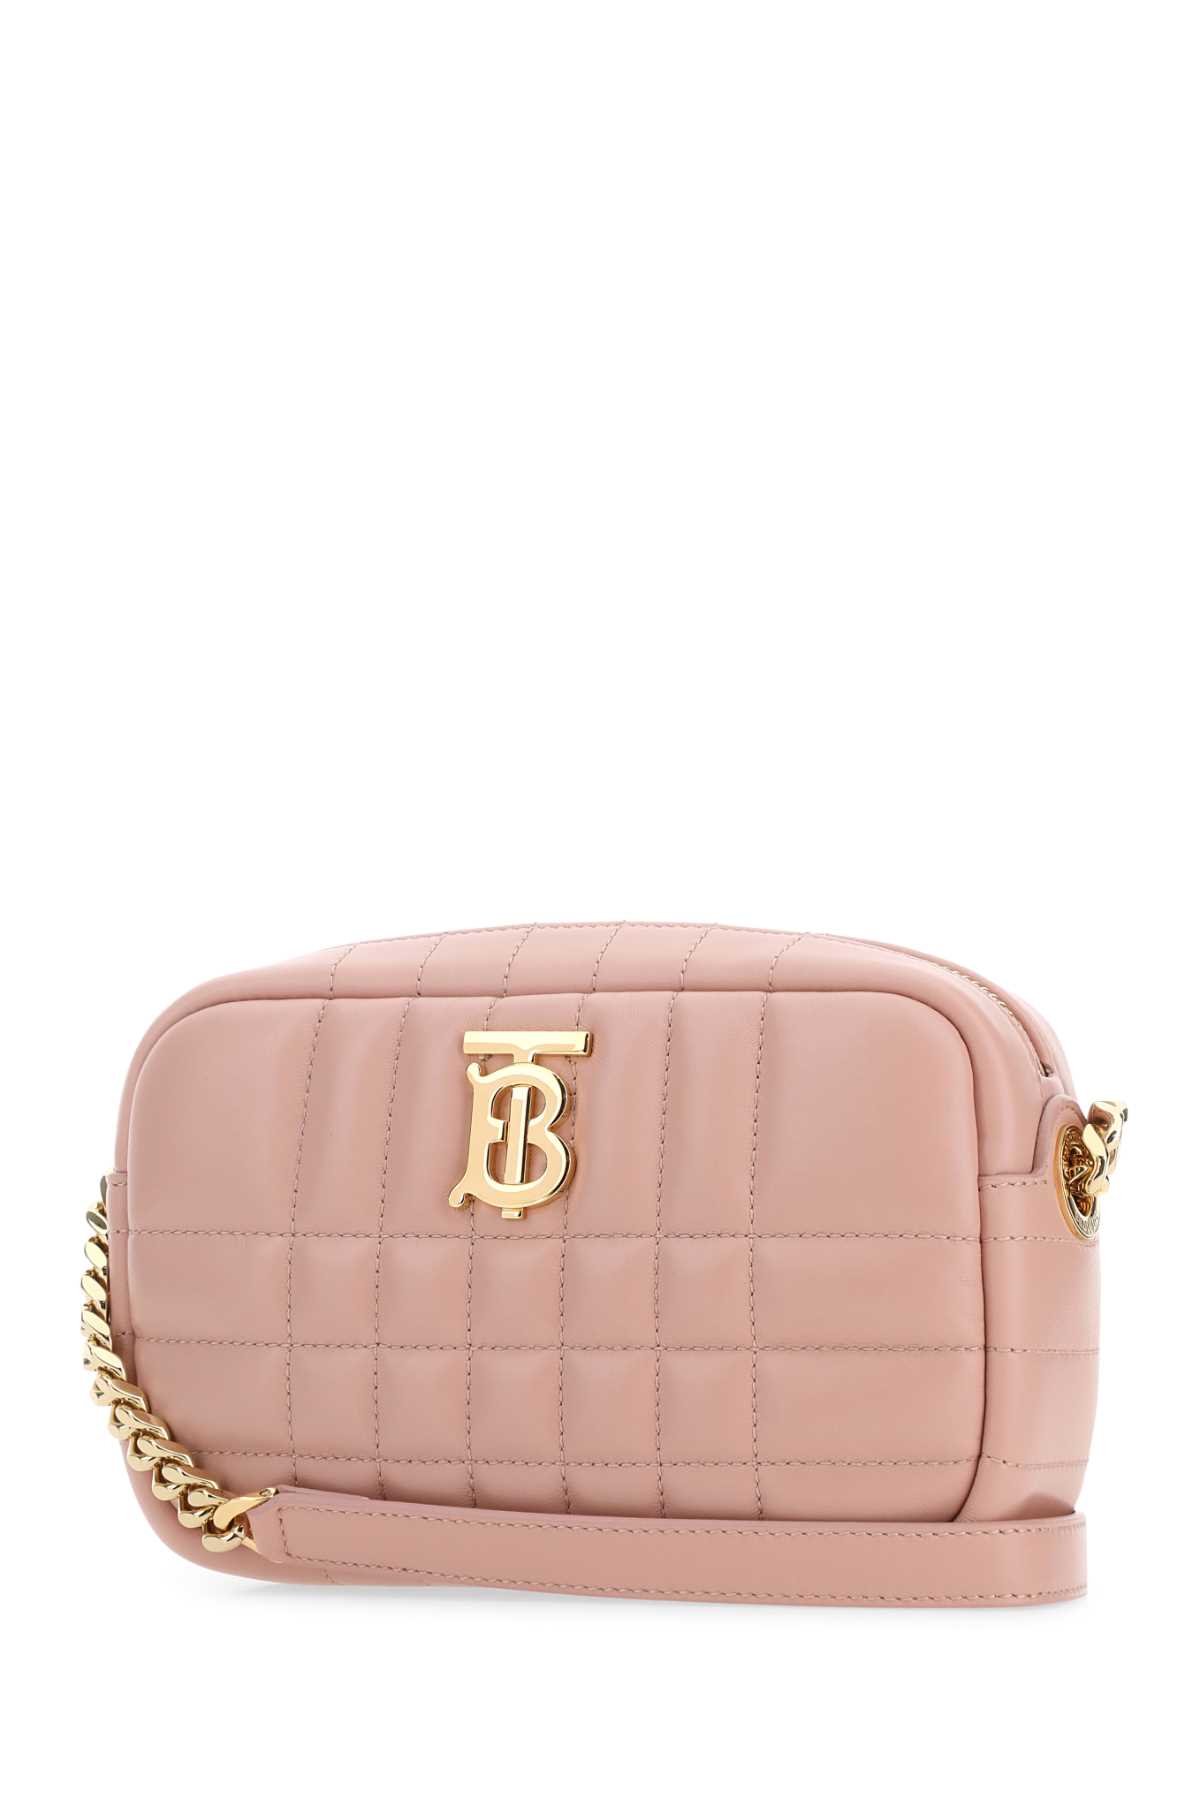 Burberry Pink Nappa Leather Small Lola Crossbody Bag In A3661